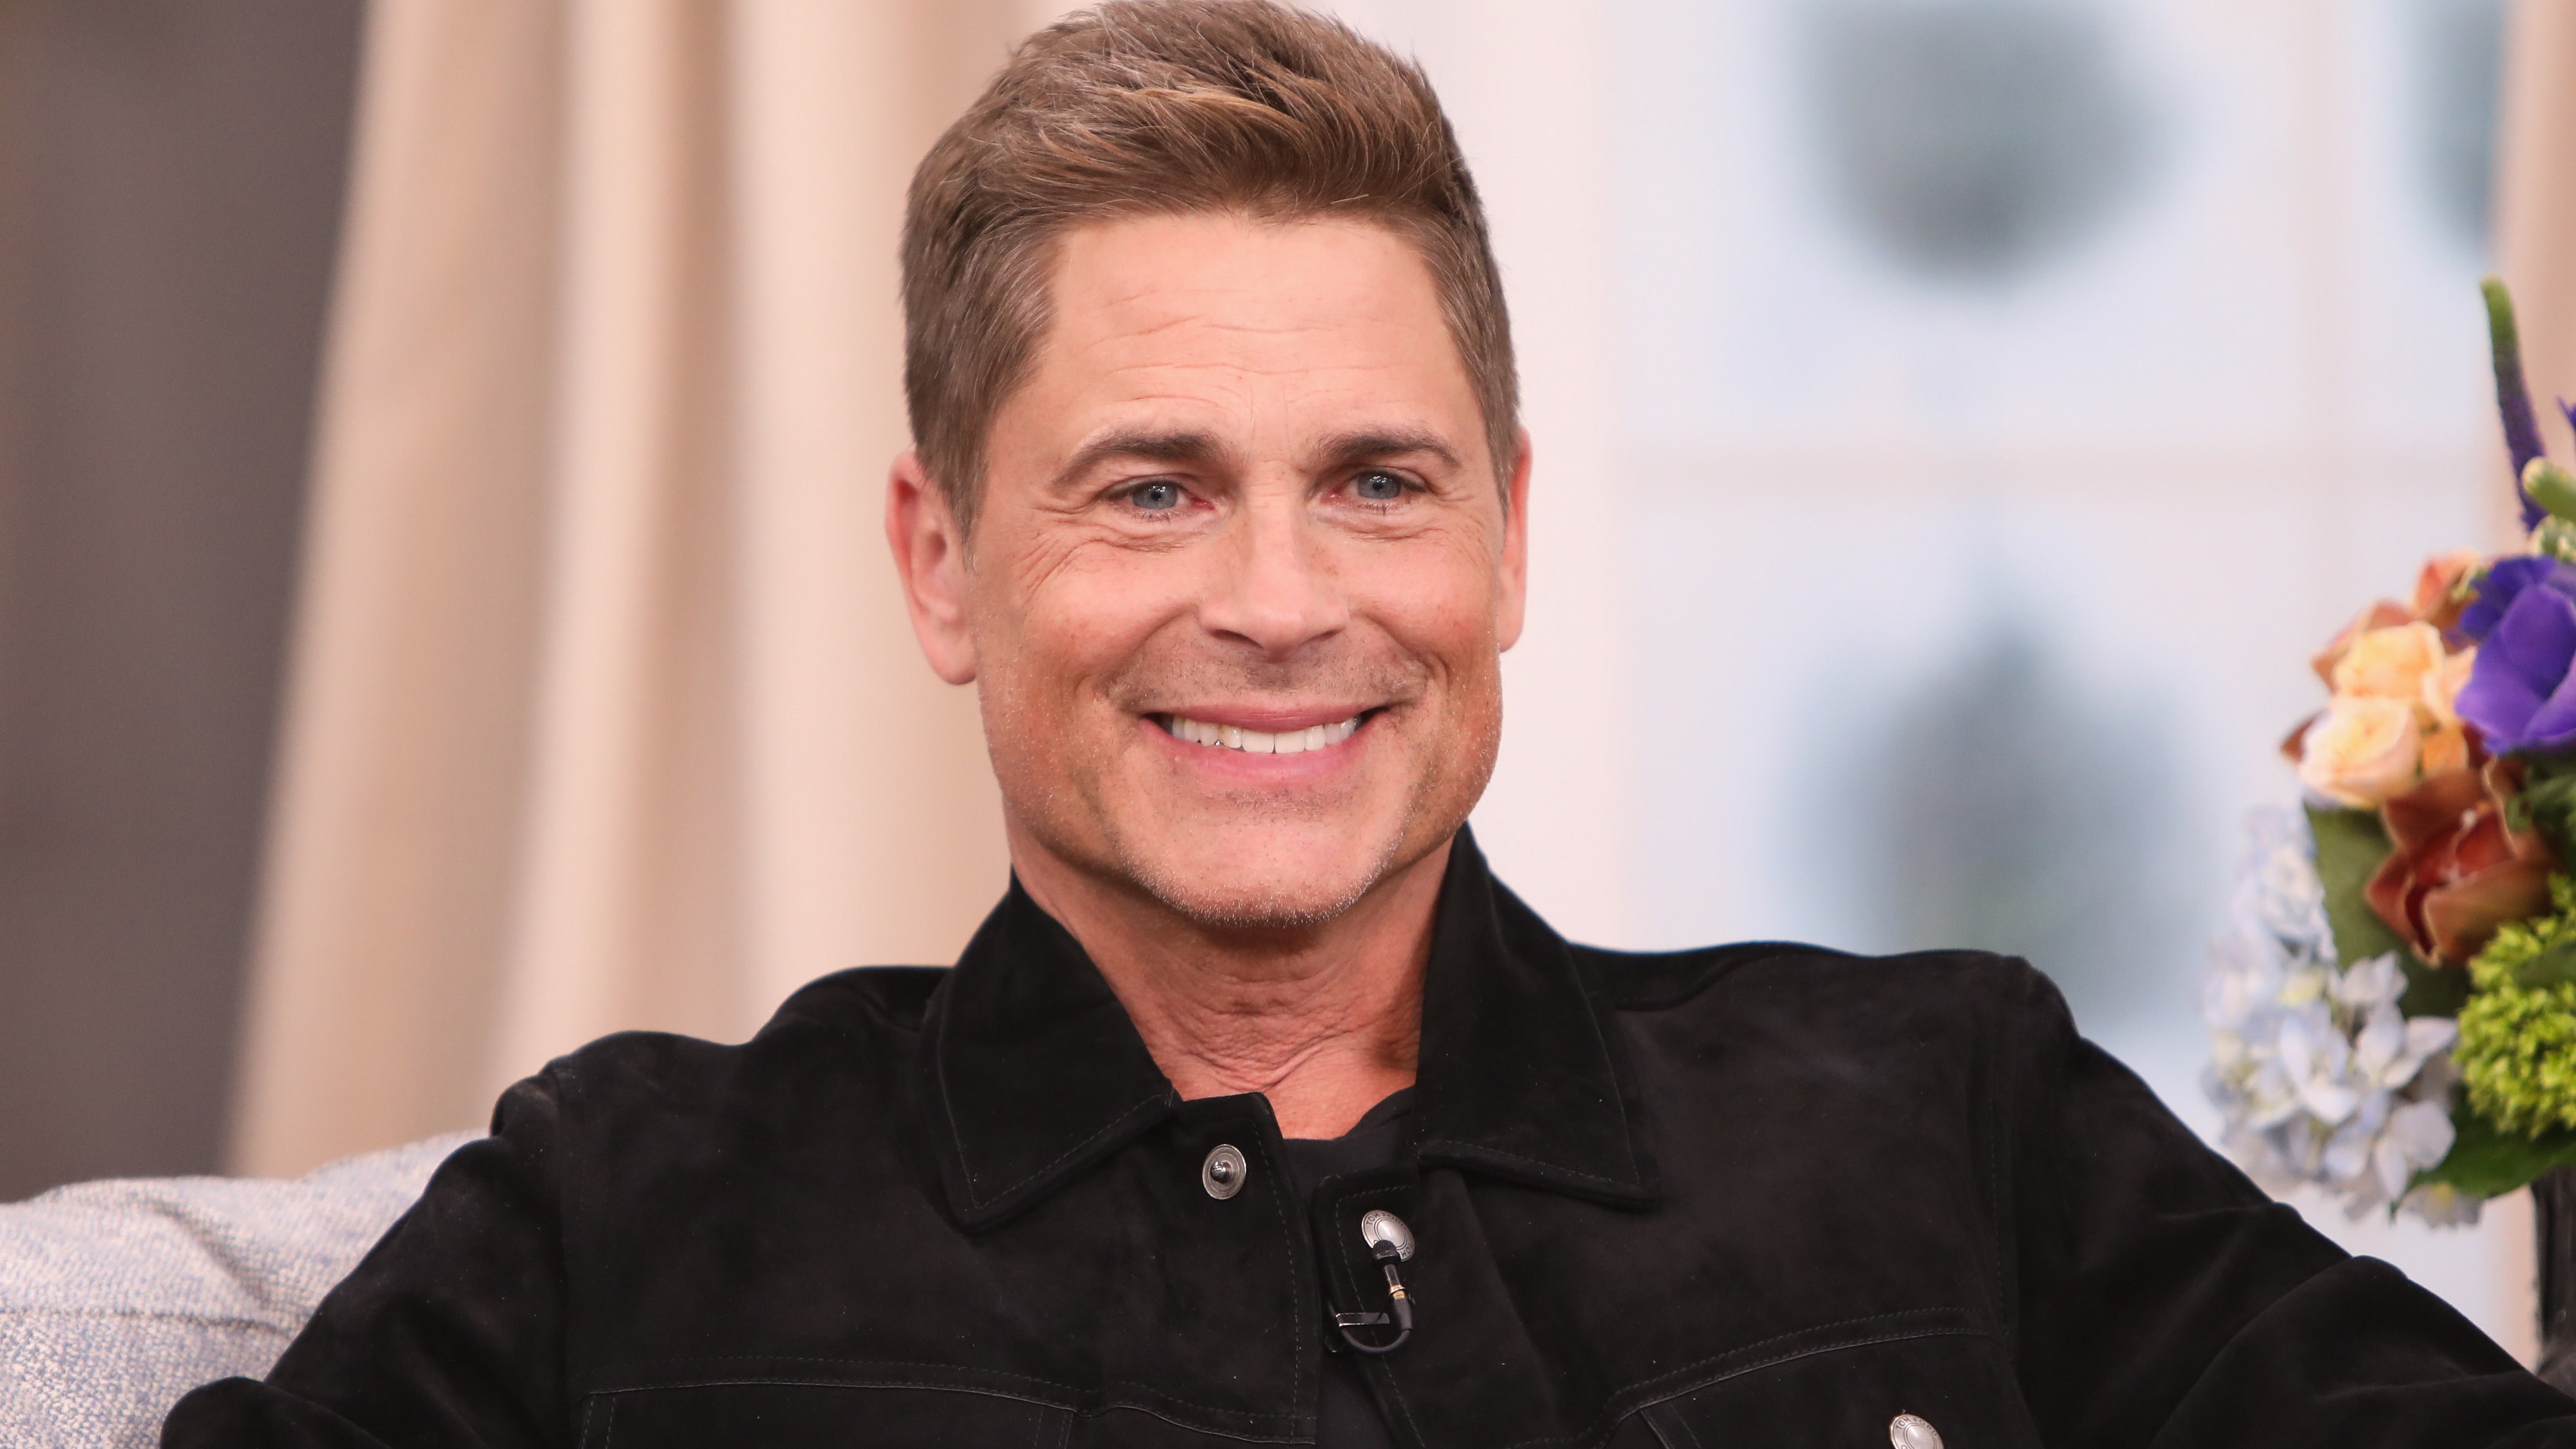 Rob Lowe celebrates 31 years of sobriety: 'I want to give thanks'